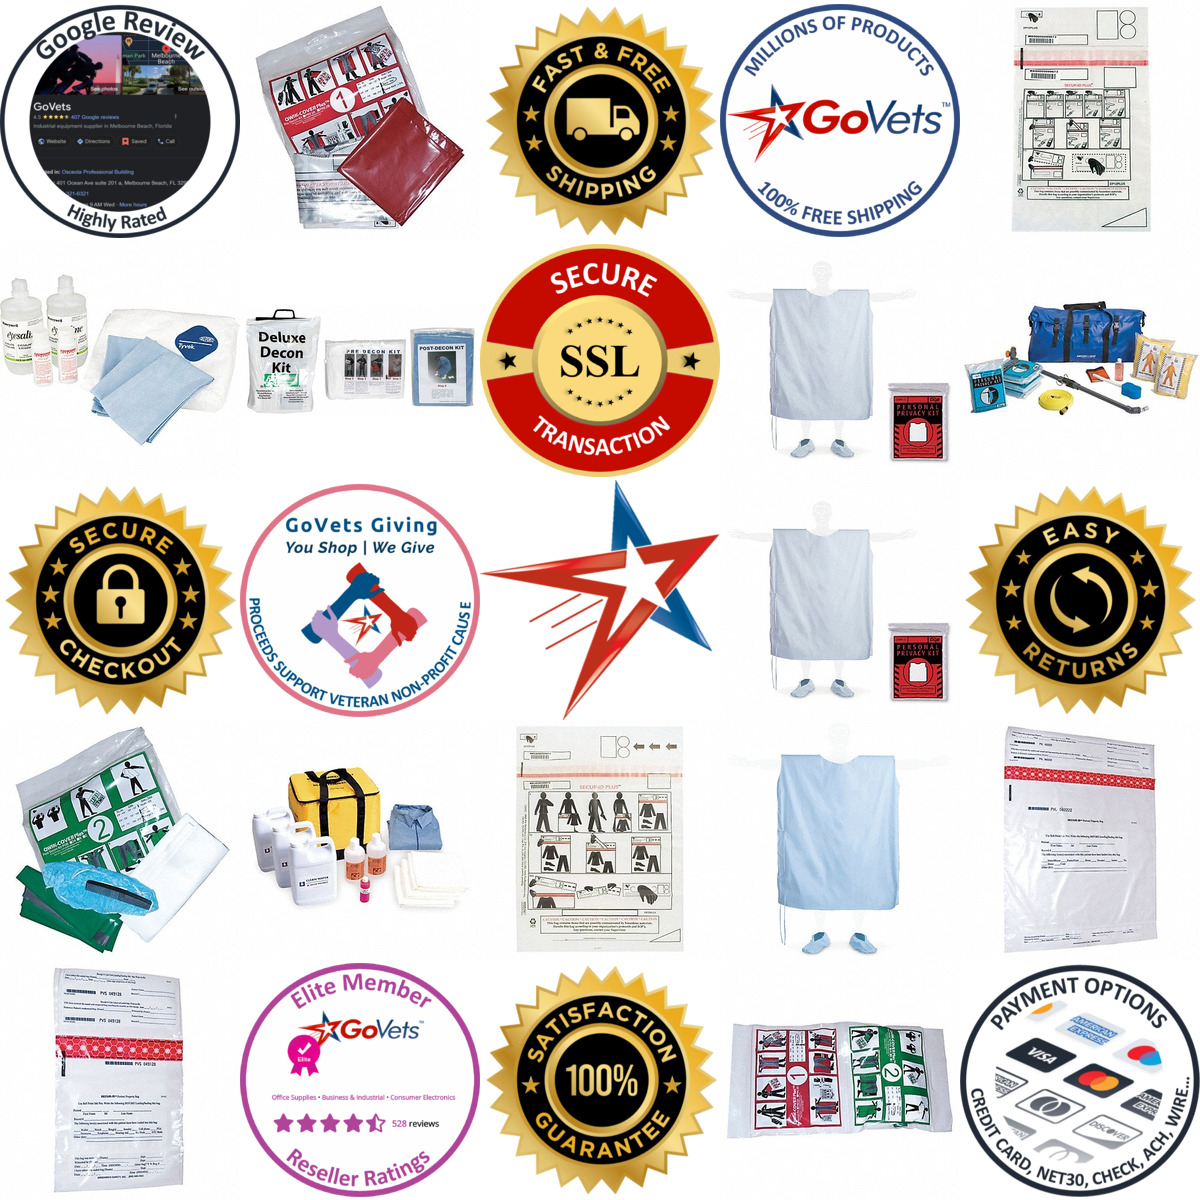 A selection of Decontamination Kits products on GoVets